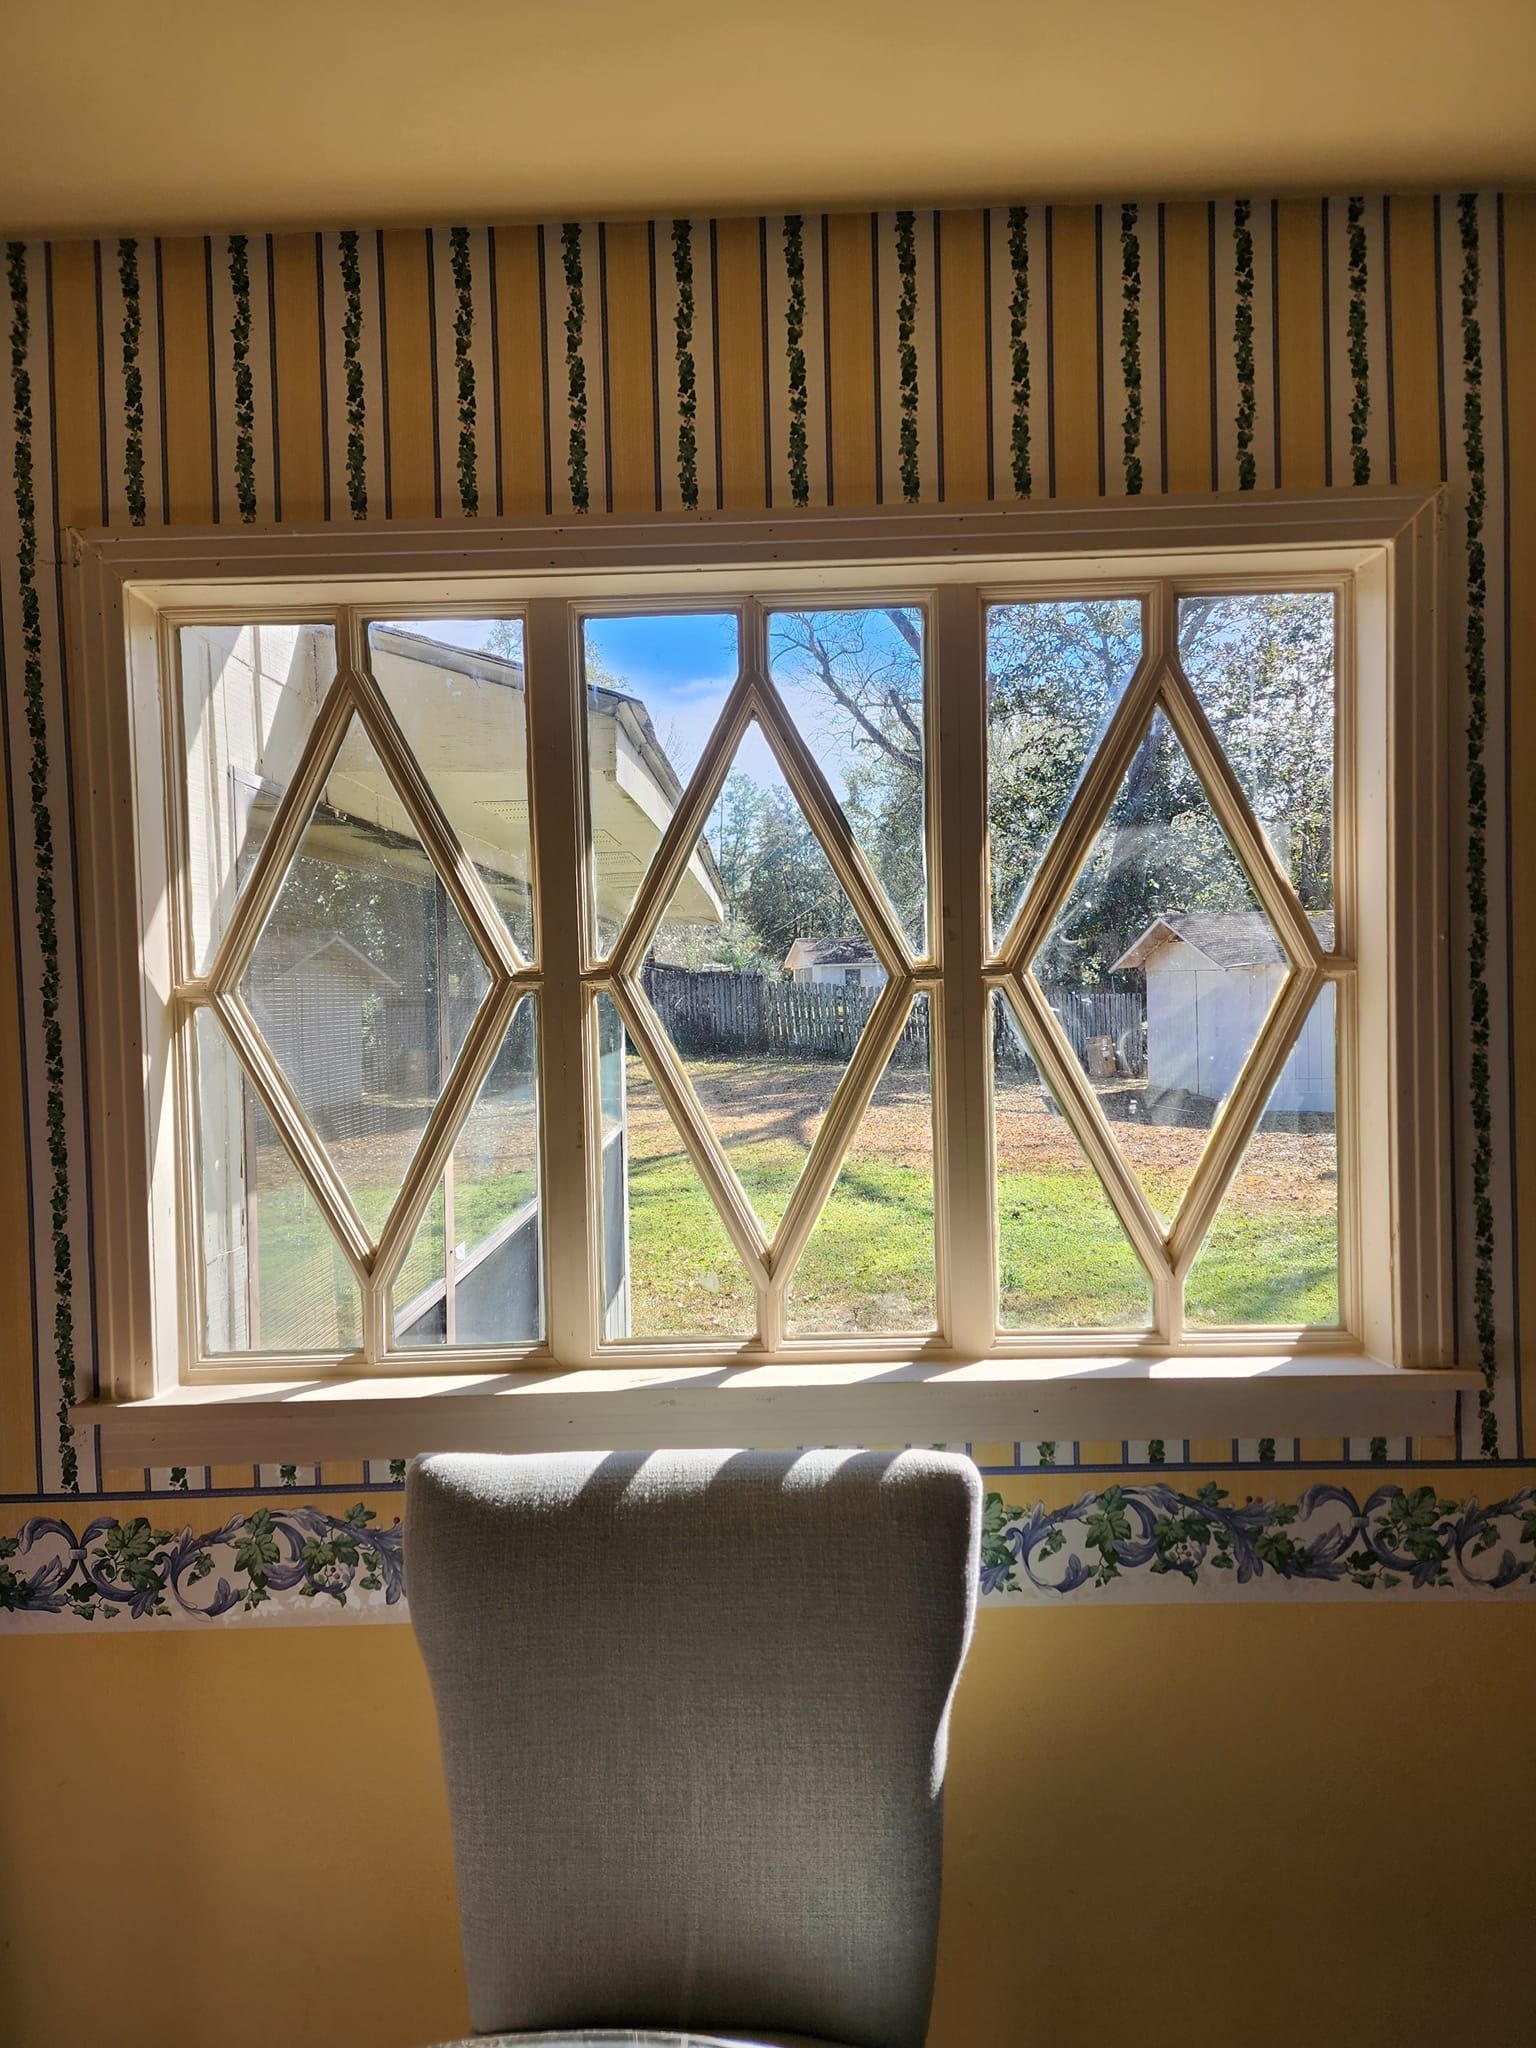 A chair in front of a window with a view of a field